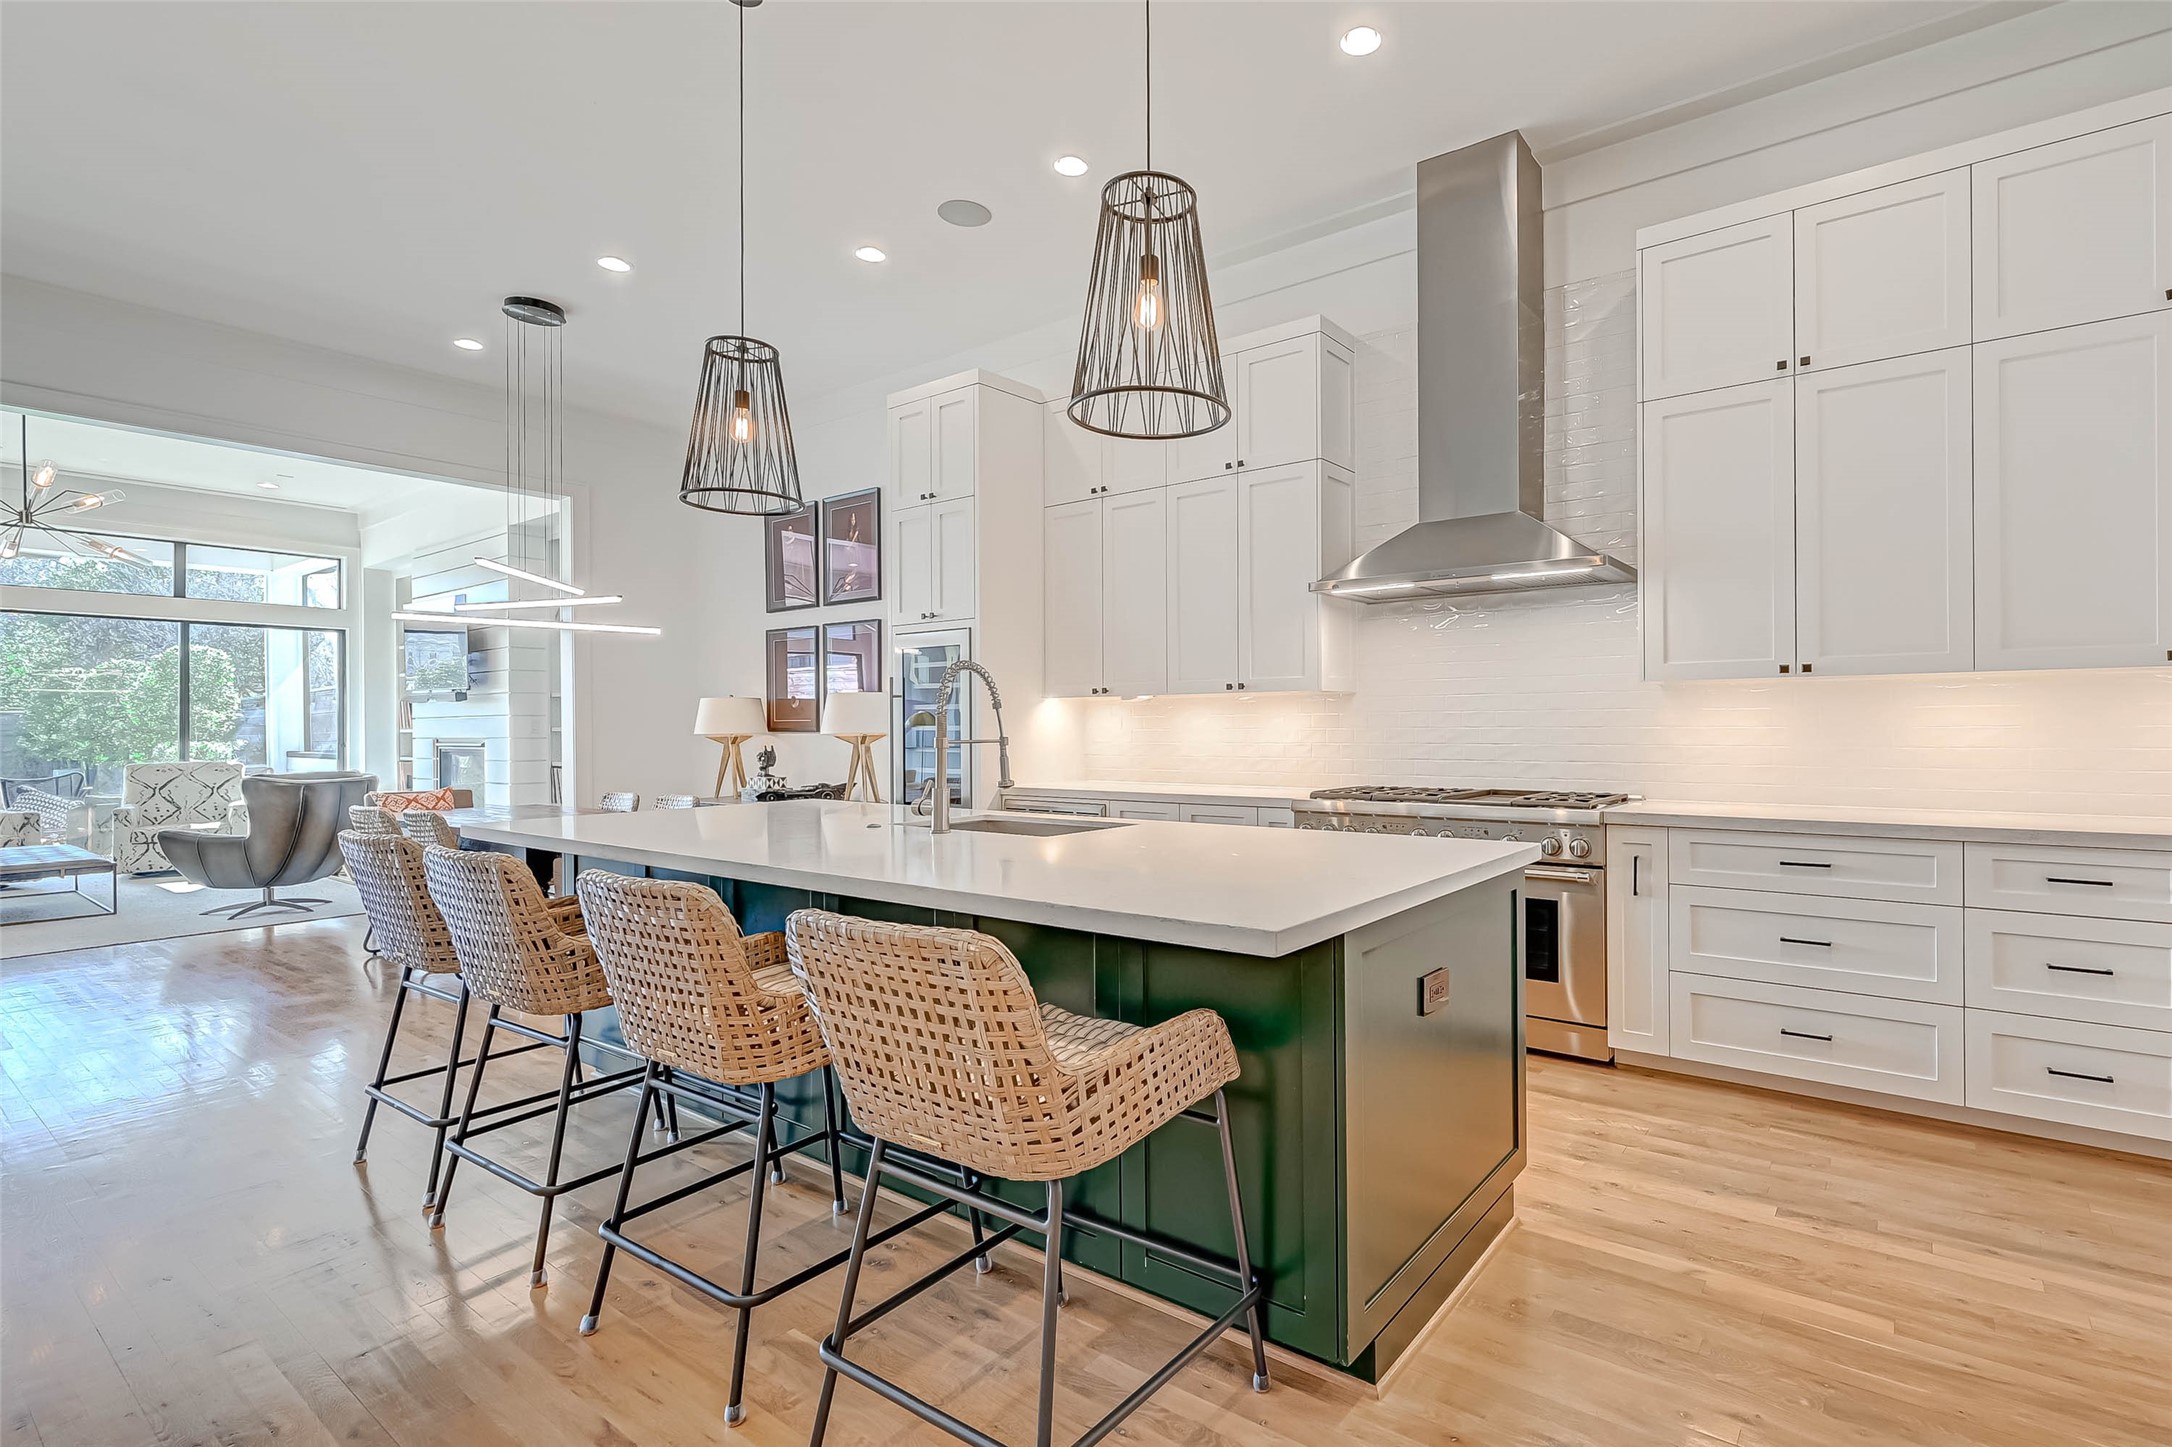 A spectacular kitchen is open and airy. Recessed lighting and exquisite drop lights over the
island accent the high ceilings and stainless-steel appliances.